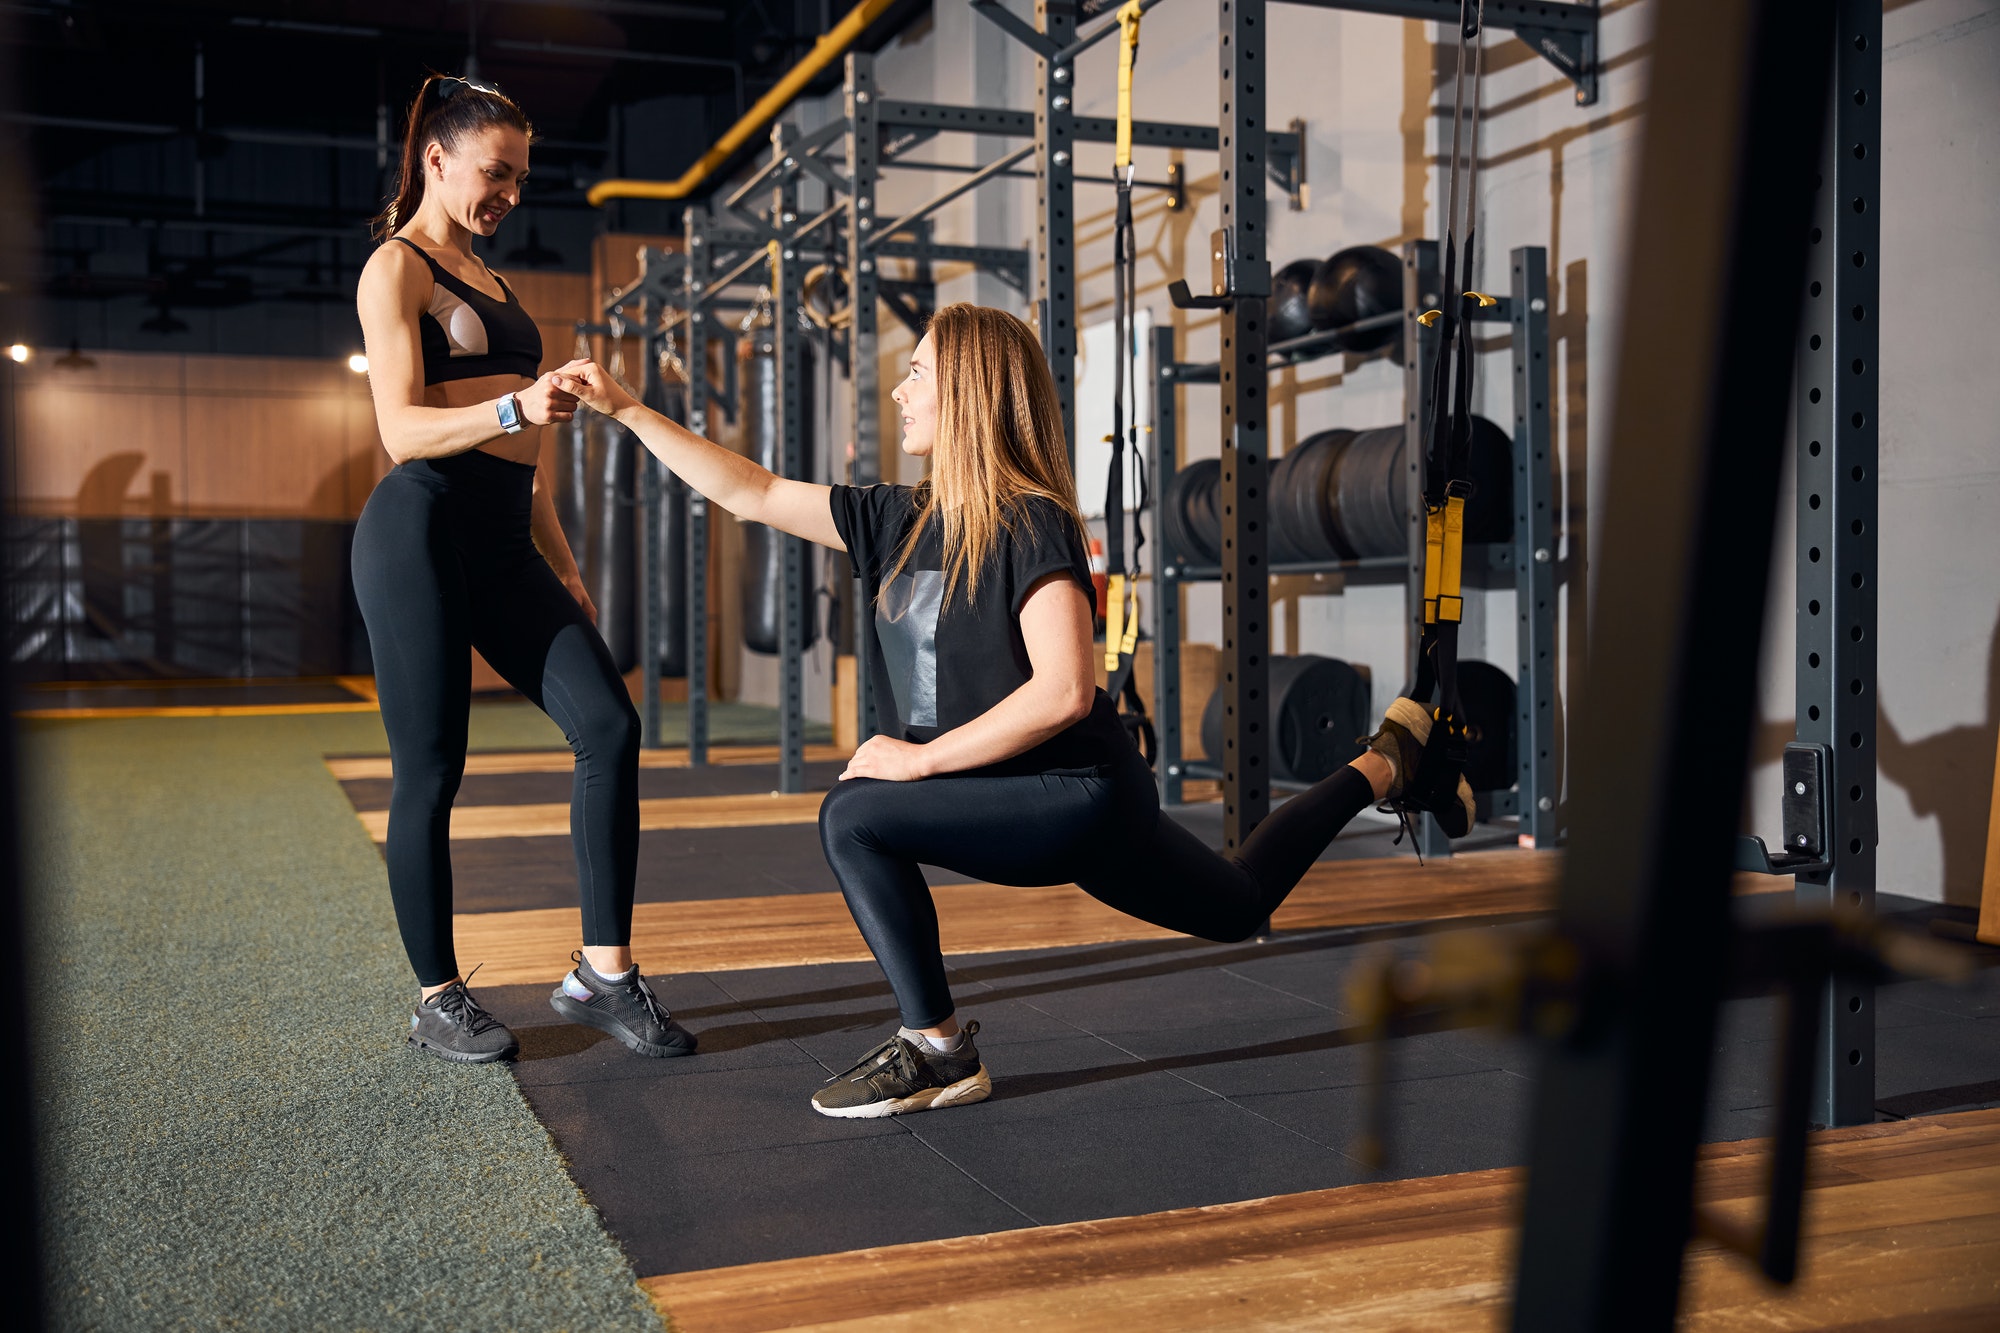 Partner exercises make the gym workout more productive